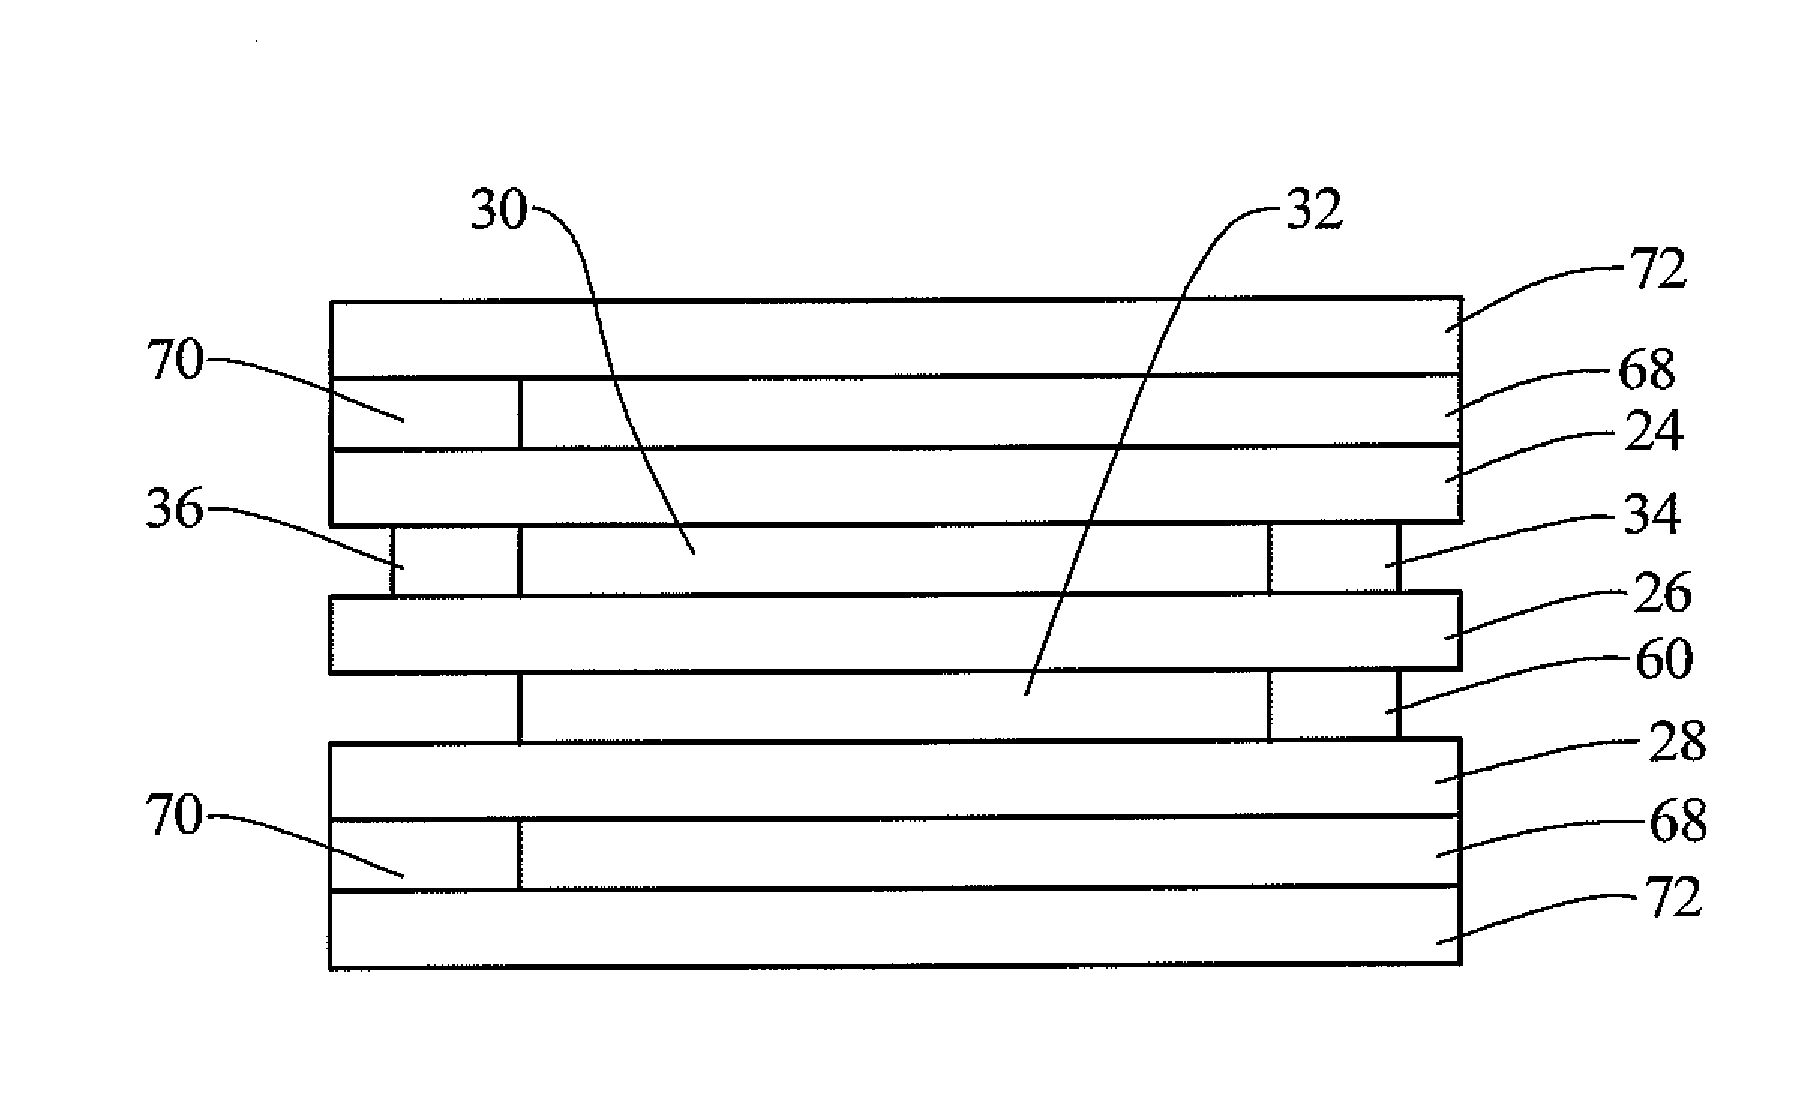 Electrical heater with a resistive neutral plane